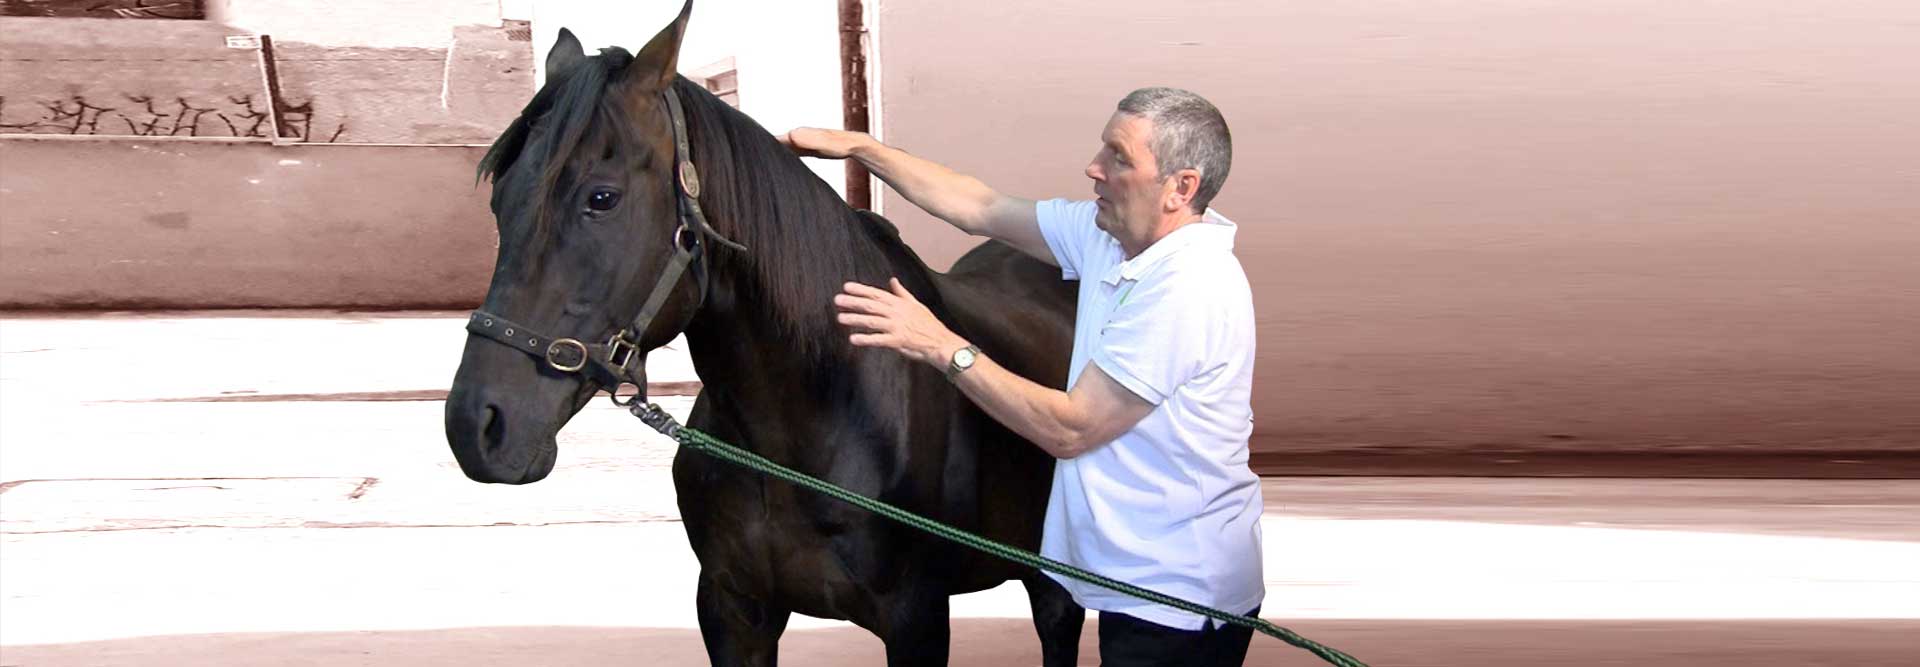 Animal Energy Healing on a Horse – Energy Healing Online Training Course